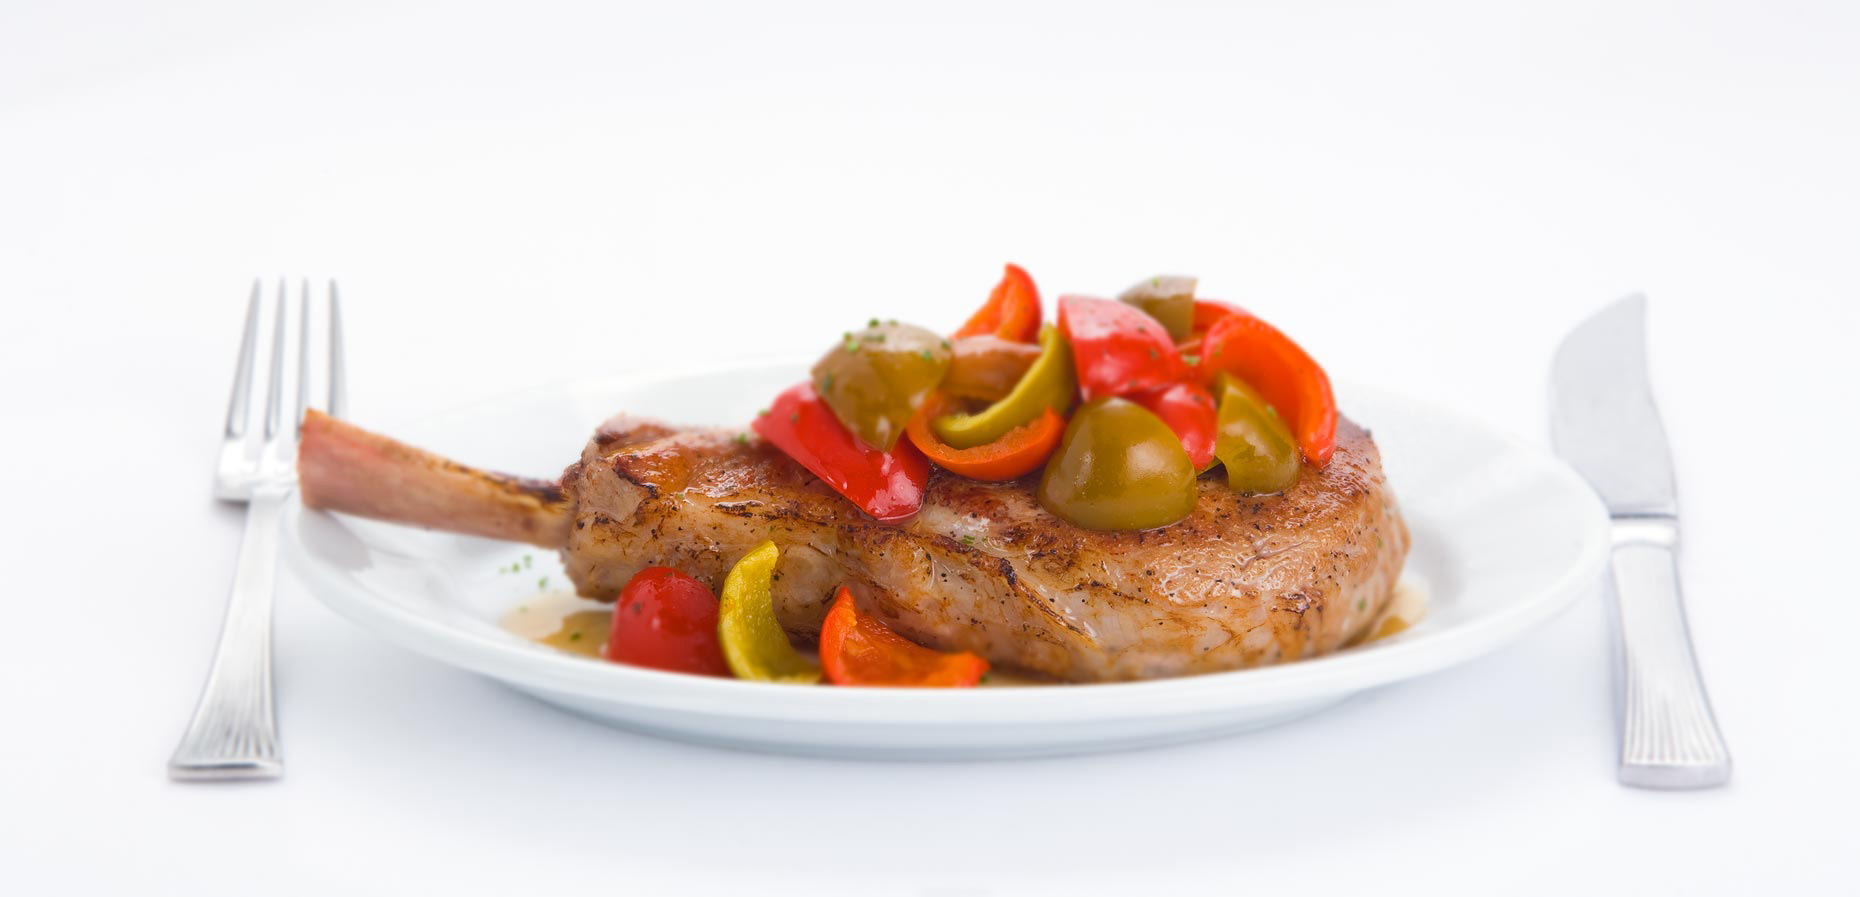 Food Photography Ruths Chris Lamb Chop & Peppers